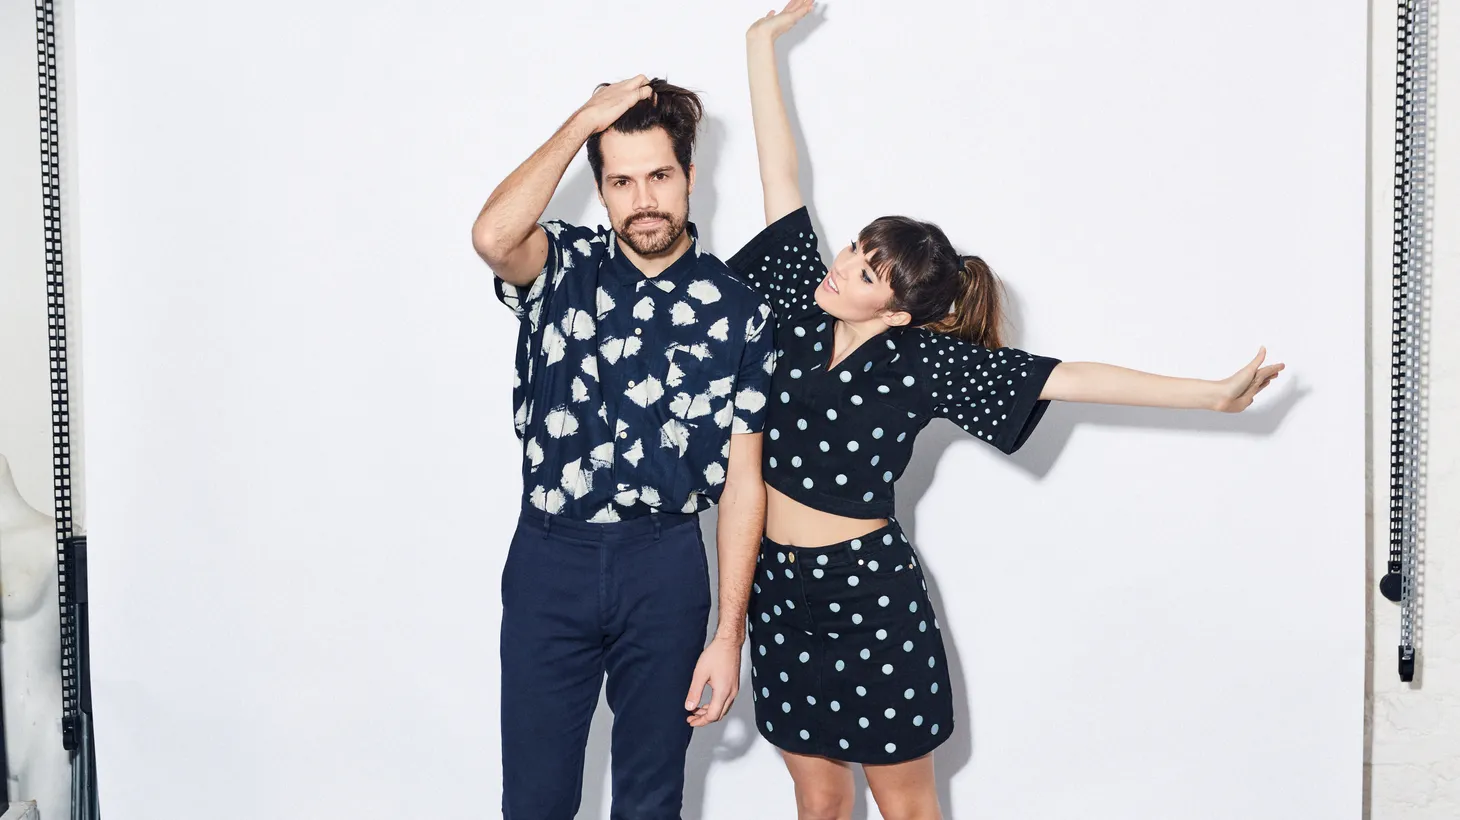 London duo Oh Wonder has been selling out venues worldwide and visits our studio before its headlining date at the Shrine Expo Hall.